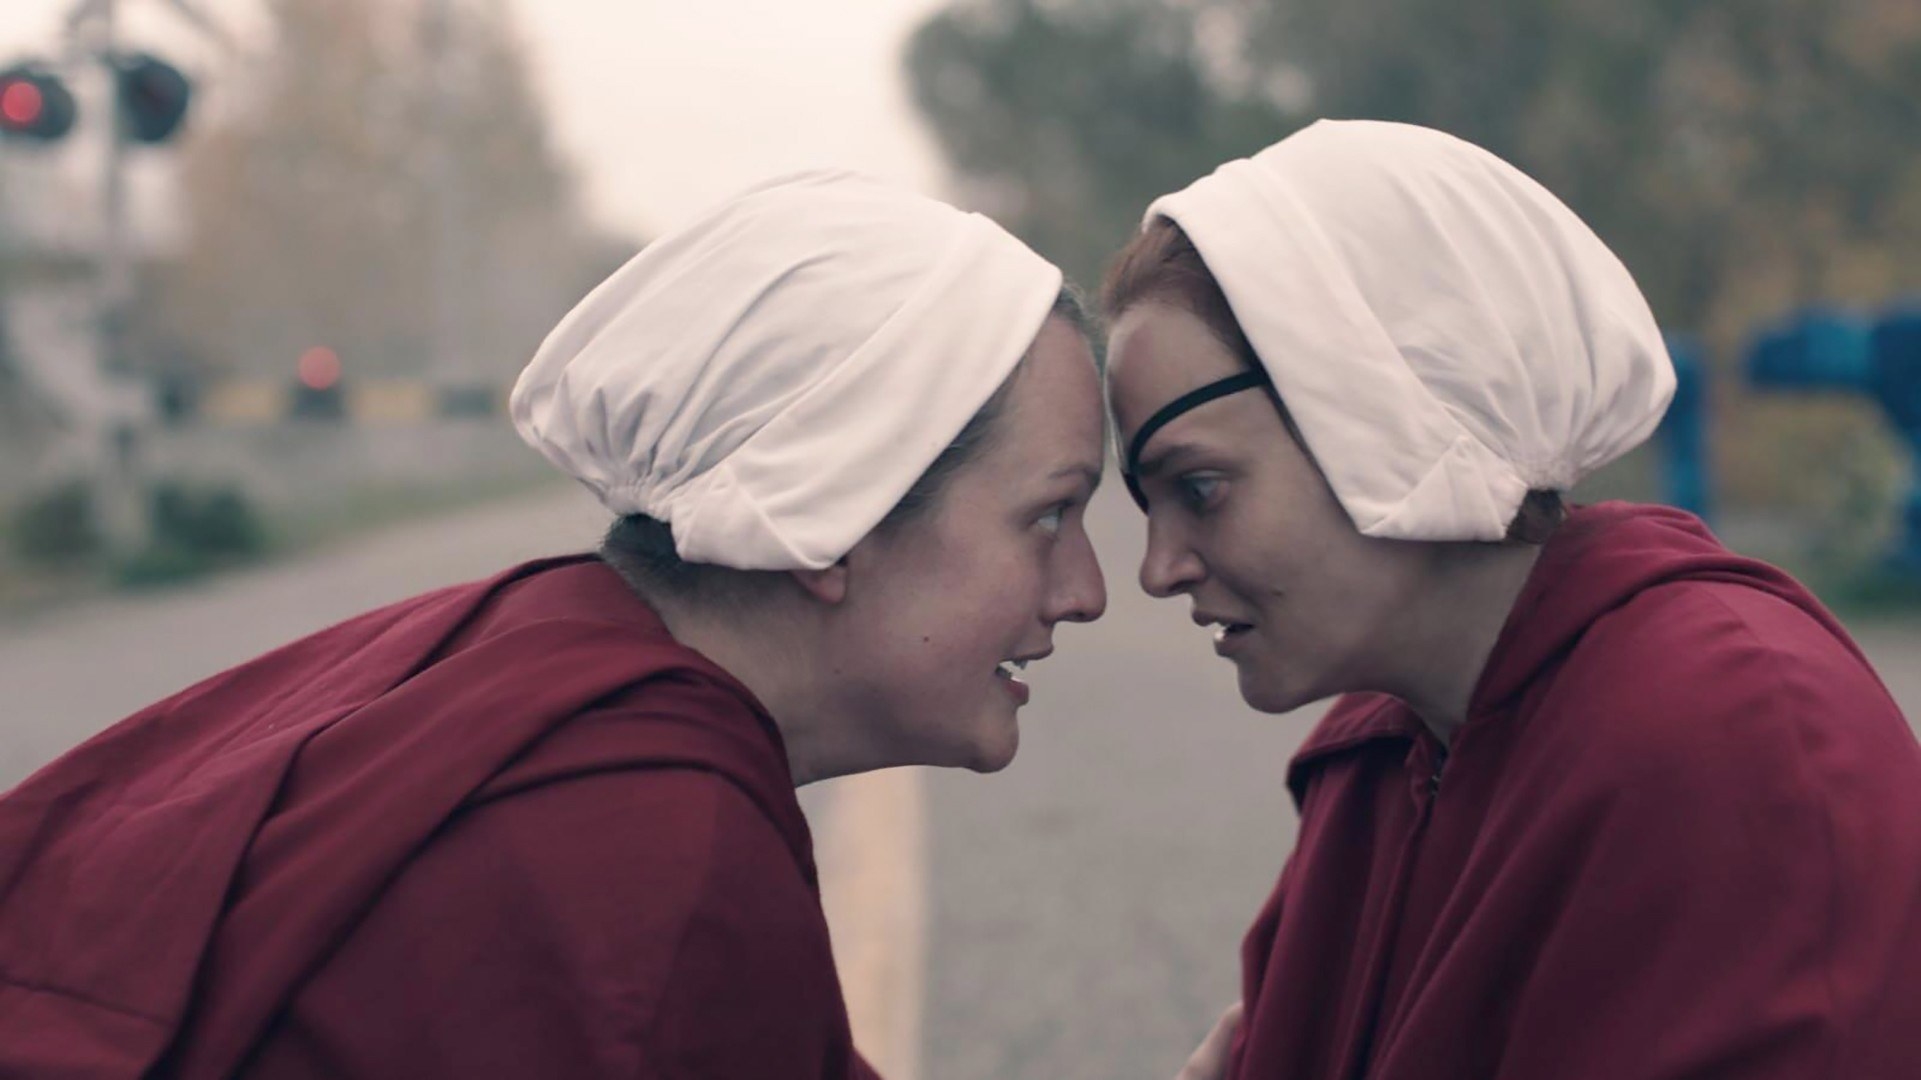 Two handmaids looking at each and their foreheads touching